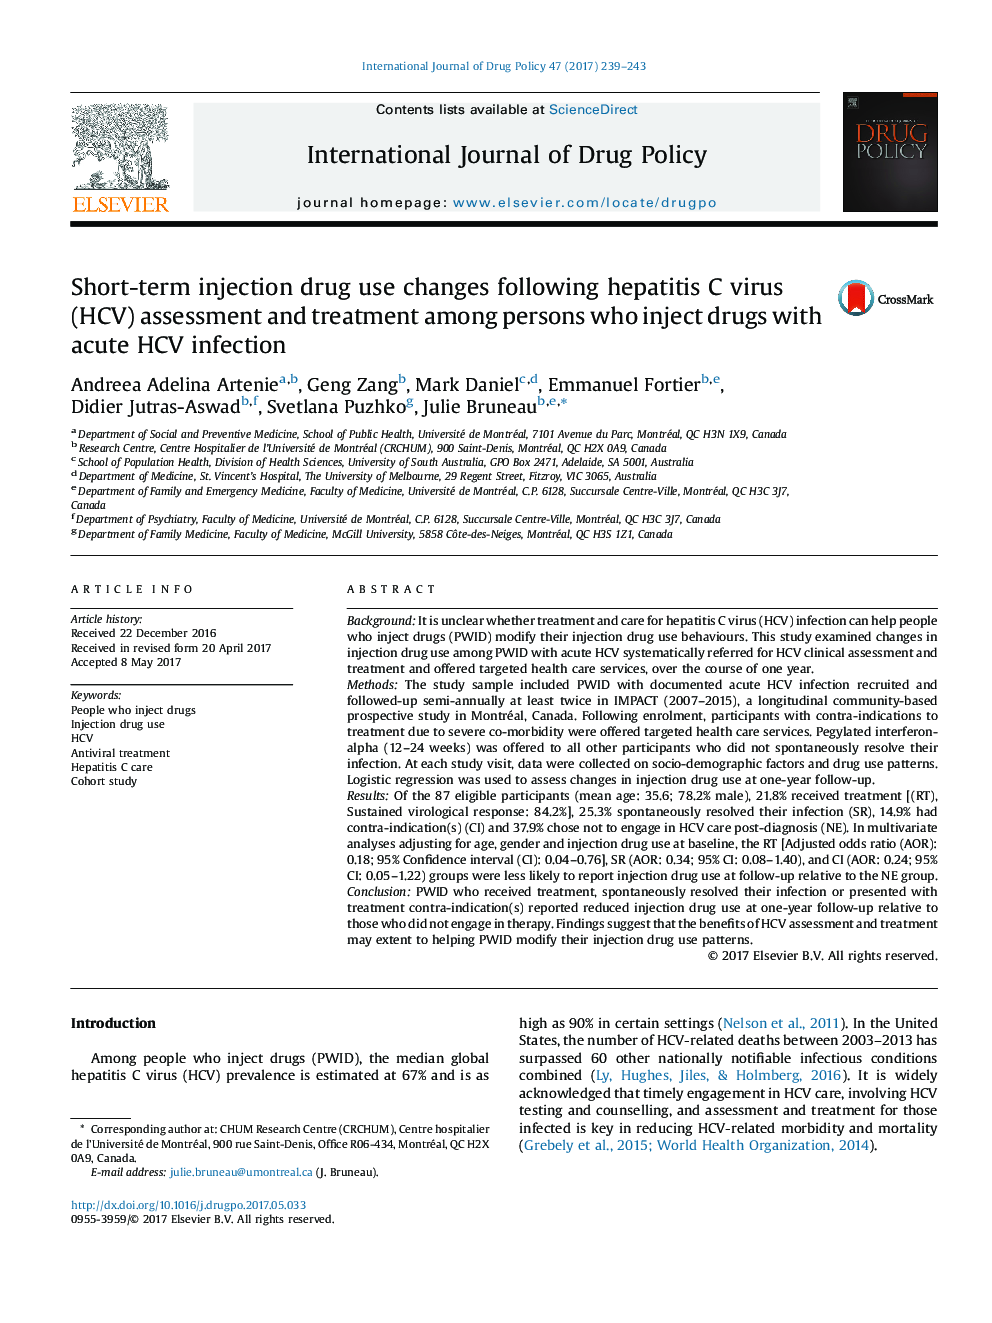 Short-term injection drug use changes following hepatitis C virus (HCV) assessment and treatment among persons who inject drugs with acute HCV infection